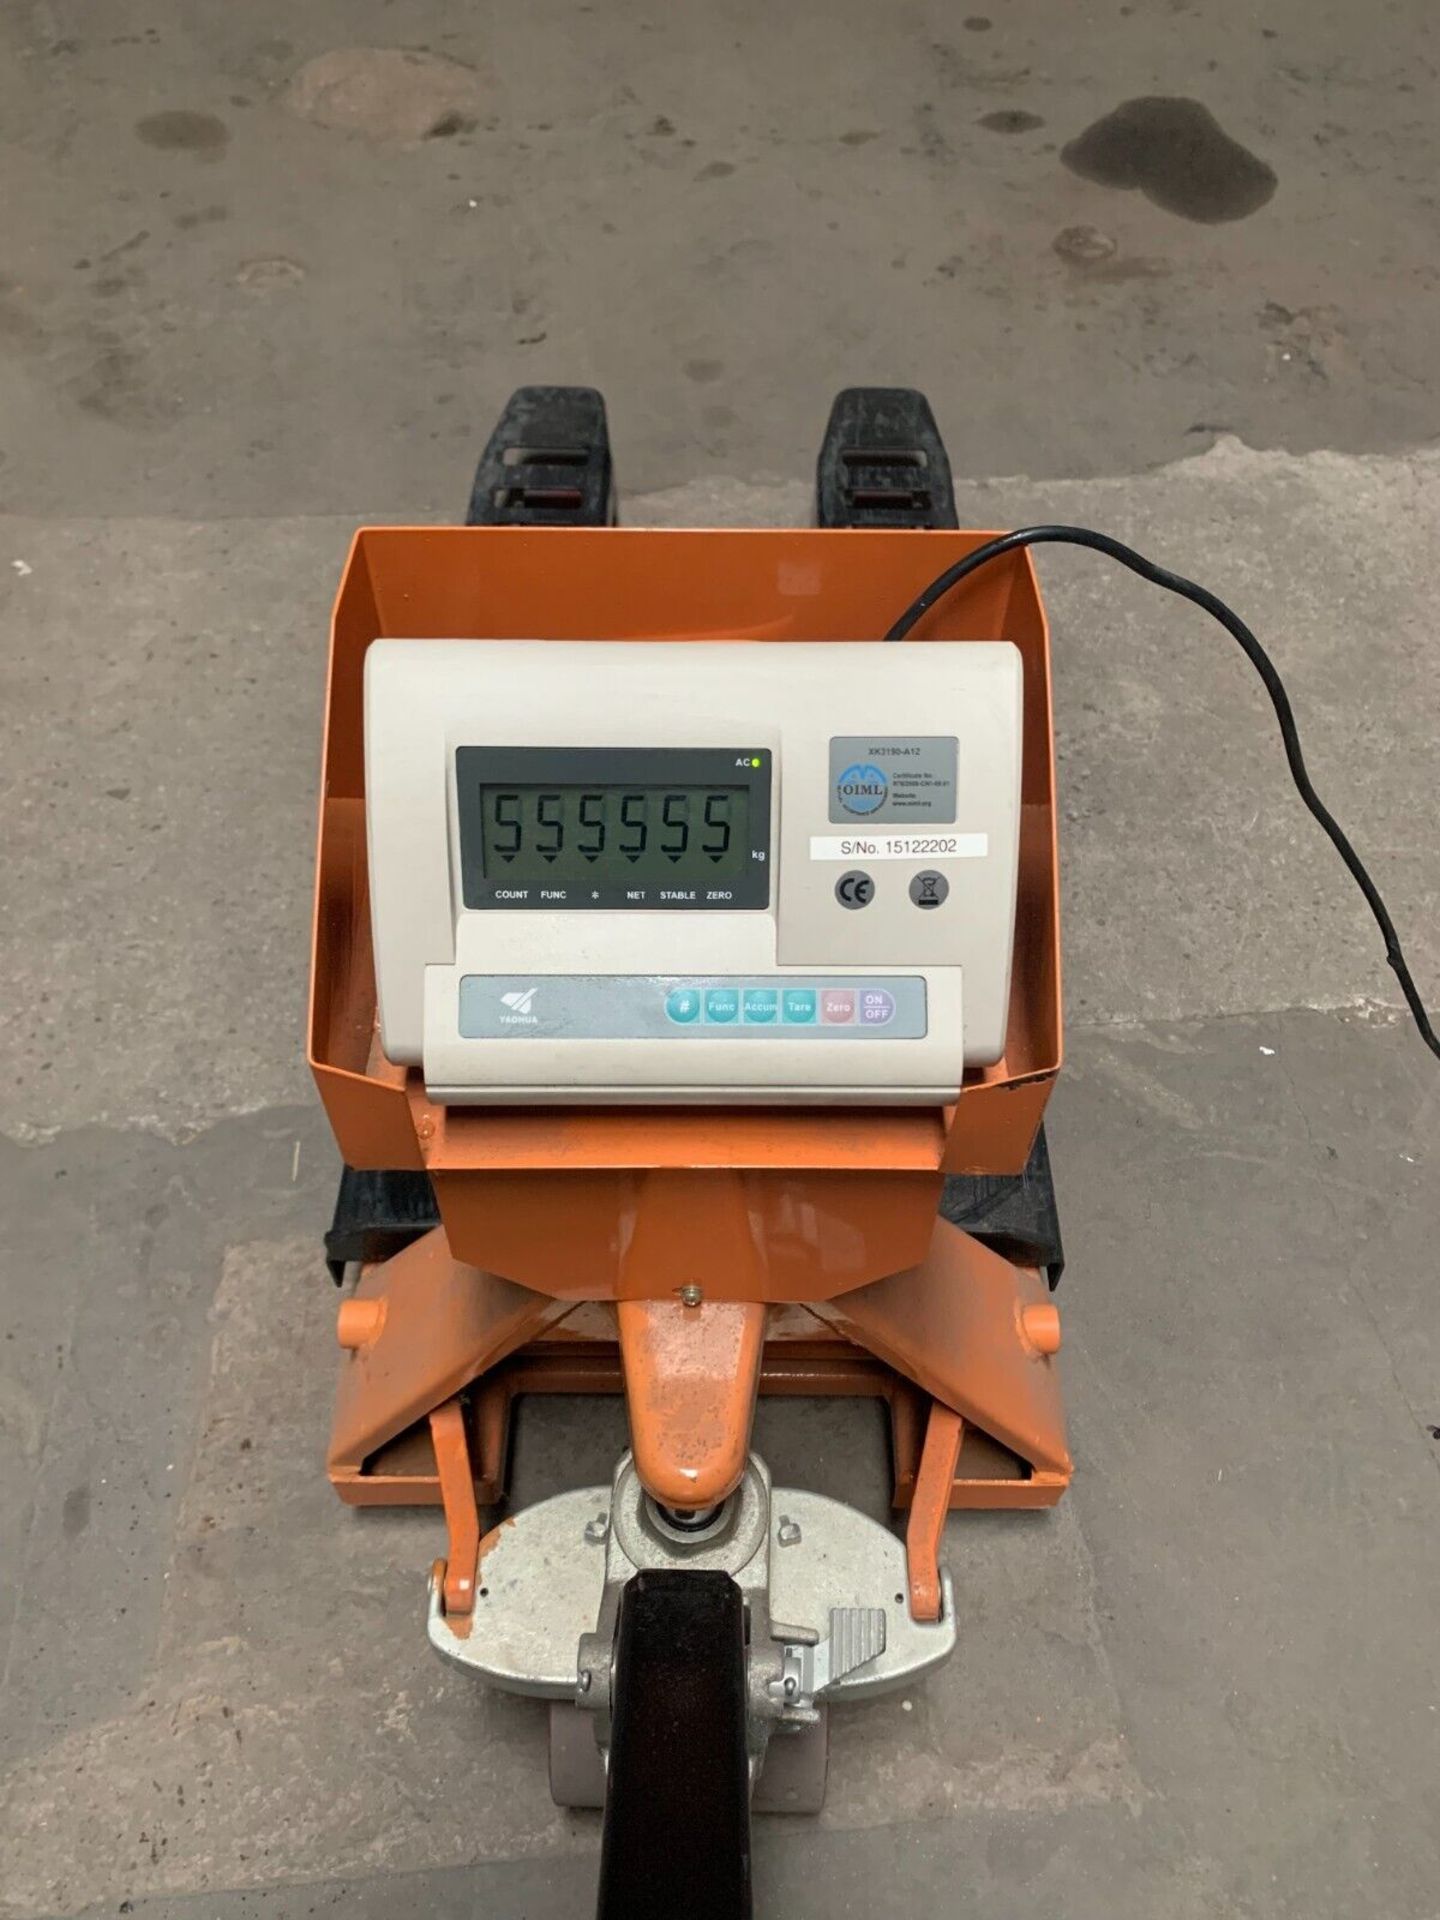 INDUSTRIAL WEIGHING PALLET TRUCK SCALE YOAHUA - Image 2 of 4